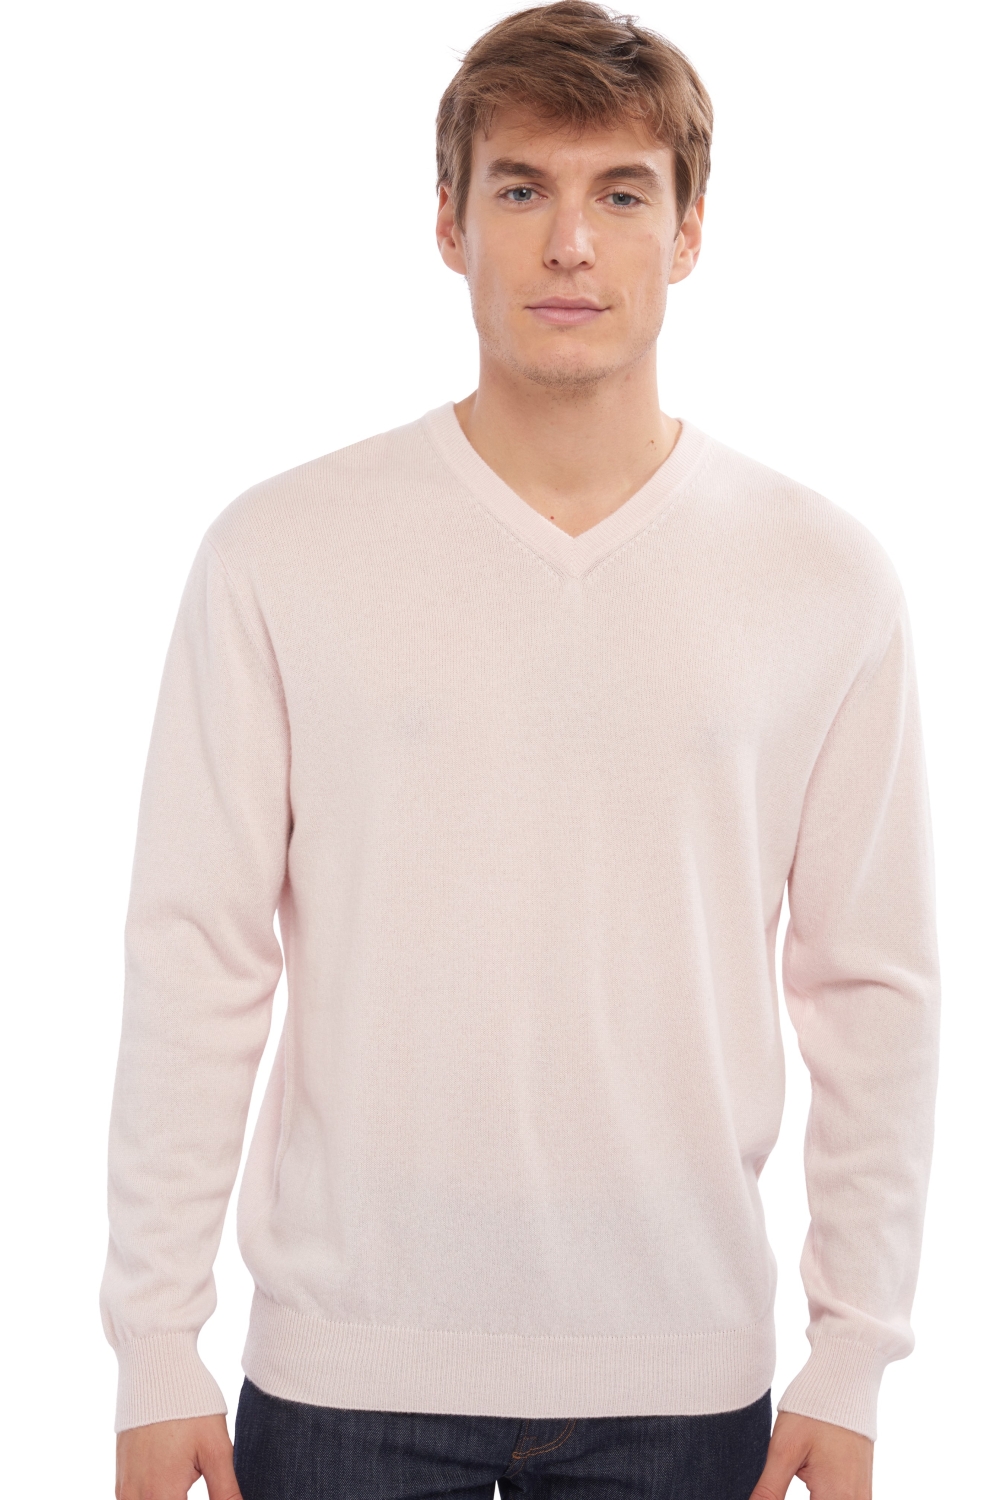 Cachemire pull homme col v gaspard rose pale xl